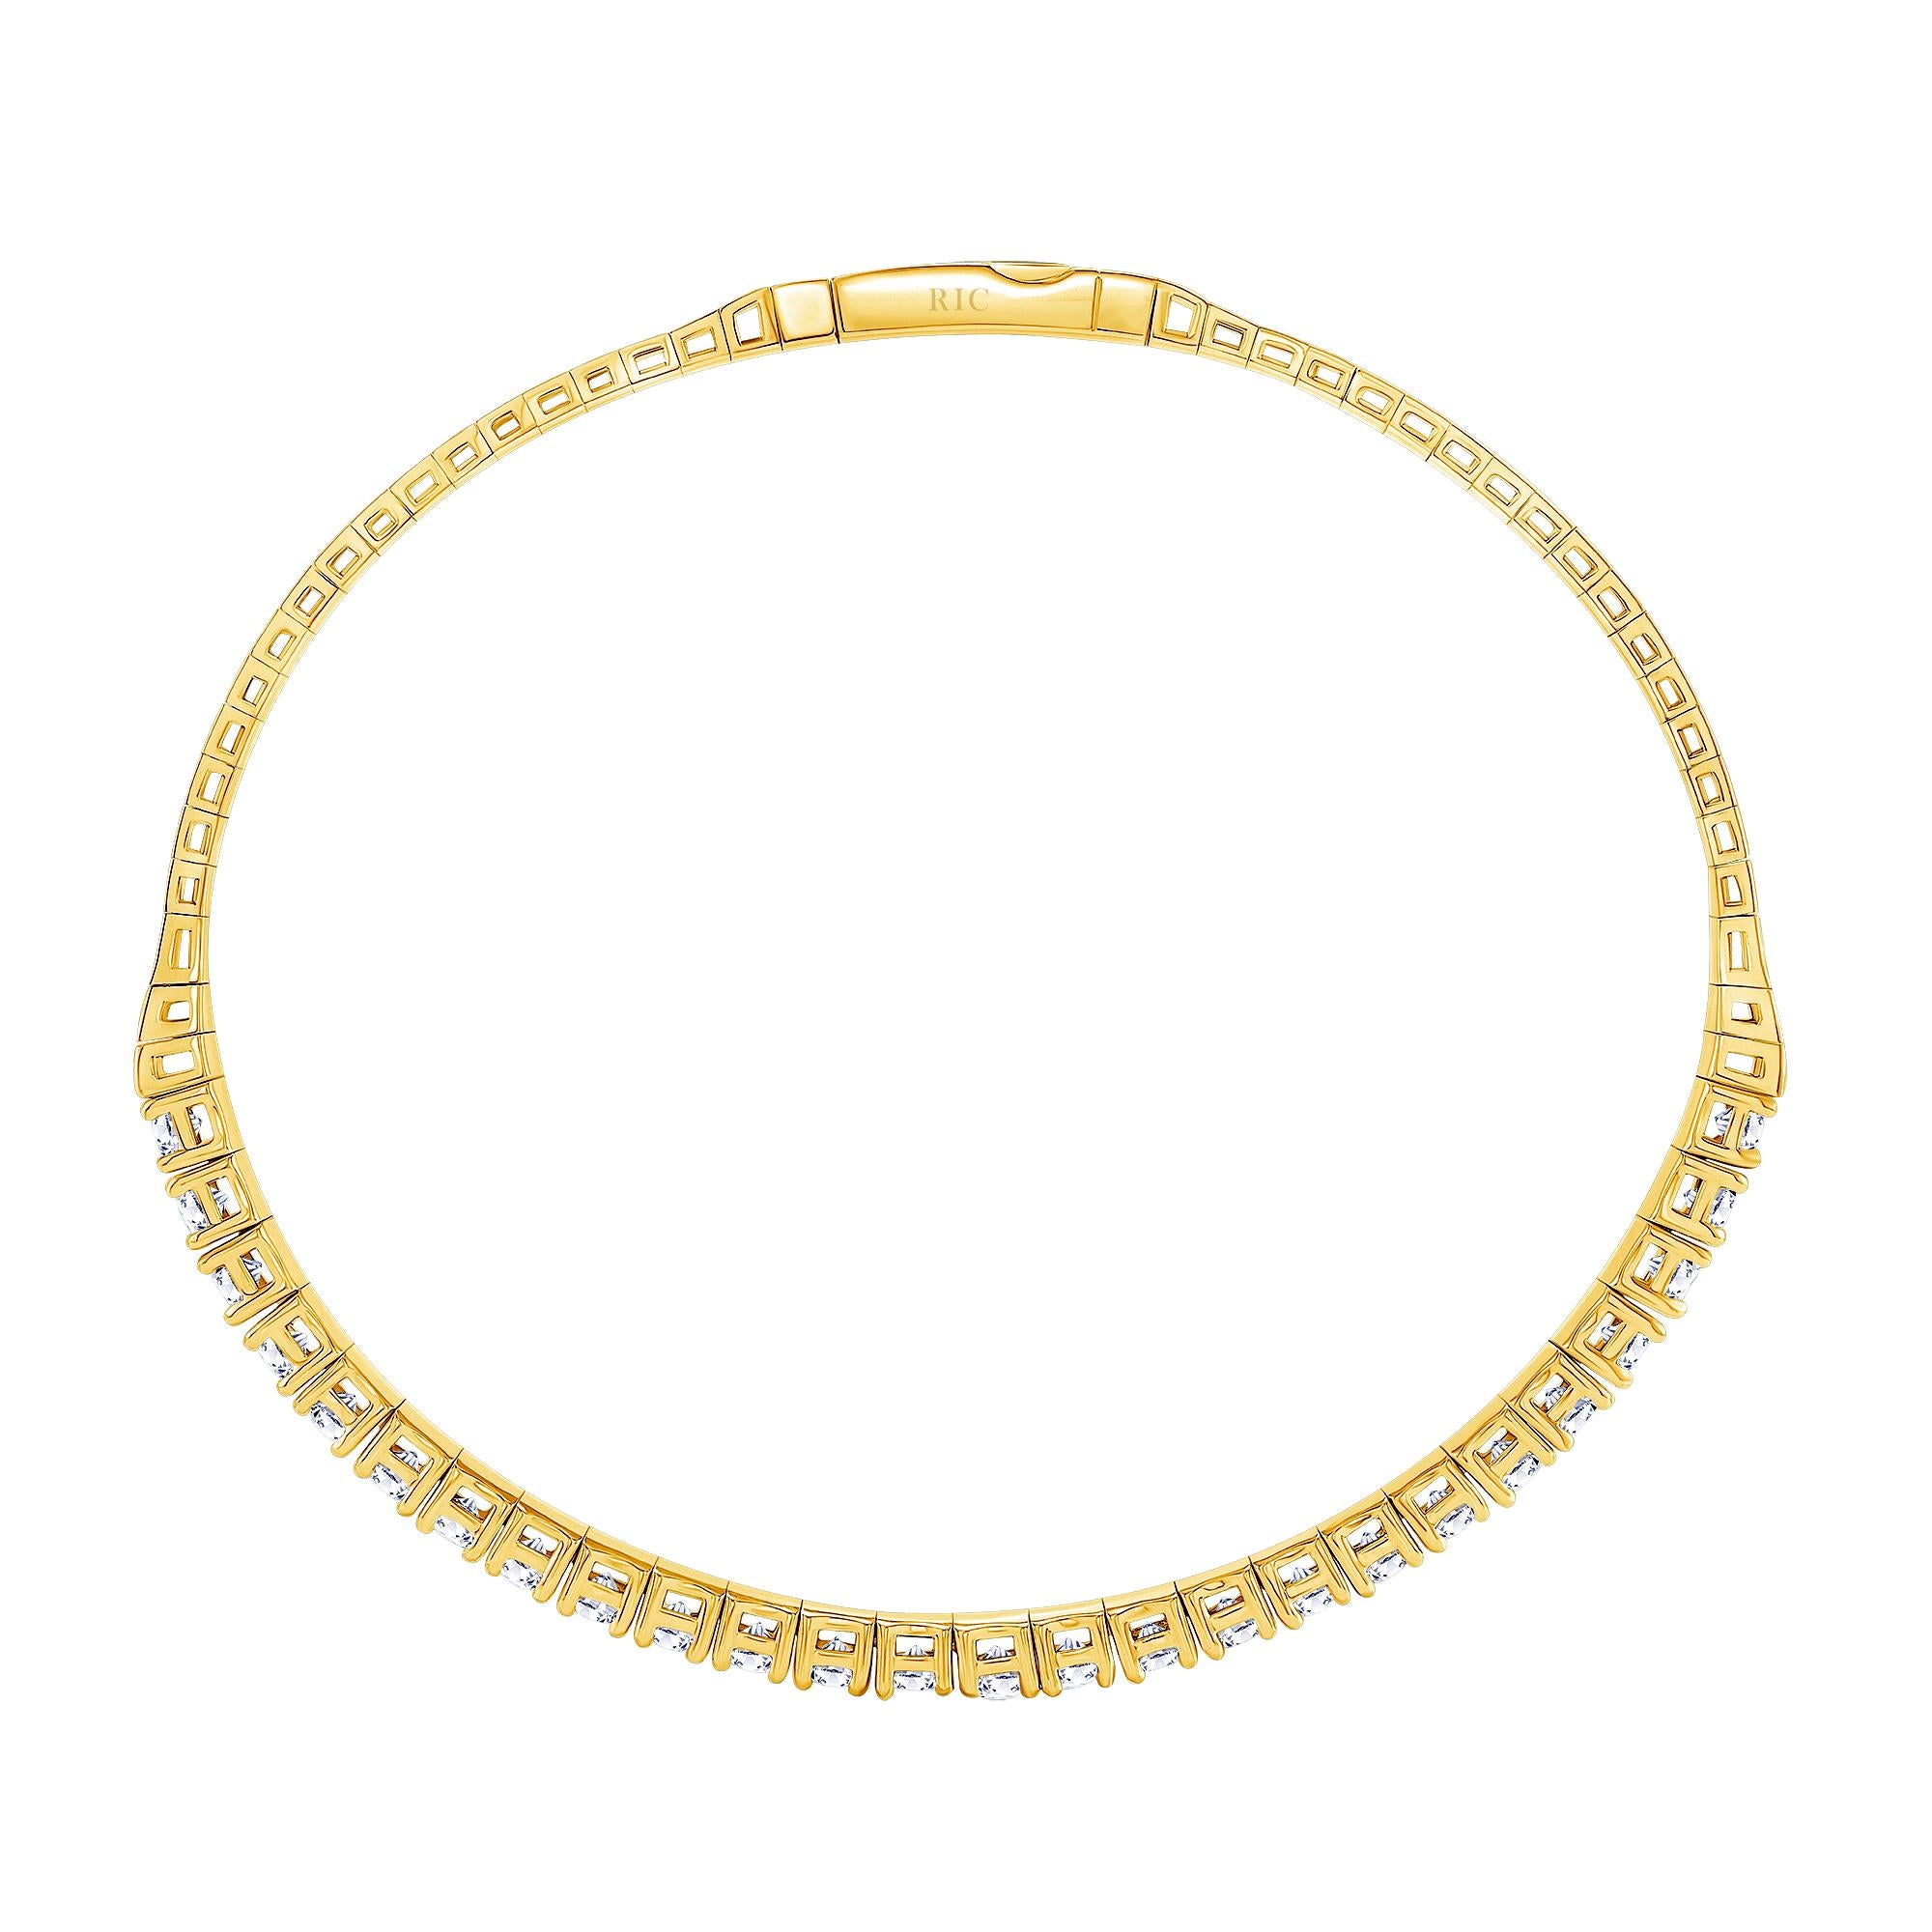 14K Yellow Gold Flexible Diamond Bangle Bracelet

- BAND -
Material: 14k Yellow Gold
Weight: 5.30 g

- STONE -
Diamond Weight: 0.915 ct
Cut (Shape): Round Diamonds
# of Diamonds: 37
Type: Natural Diamonds
Color Grade: G
Clarity: SI1

- SIZING -
The